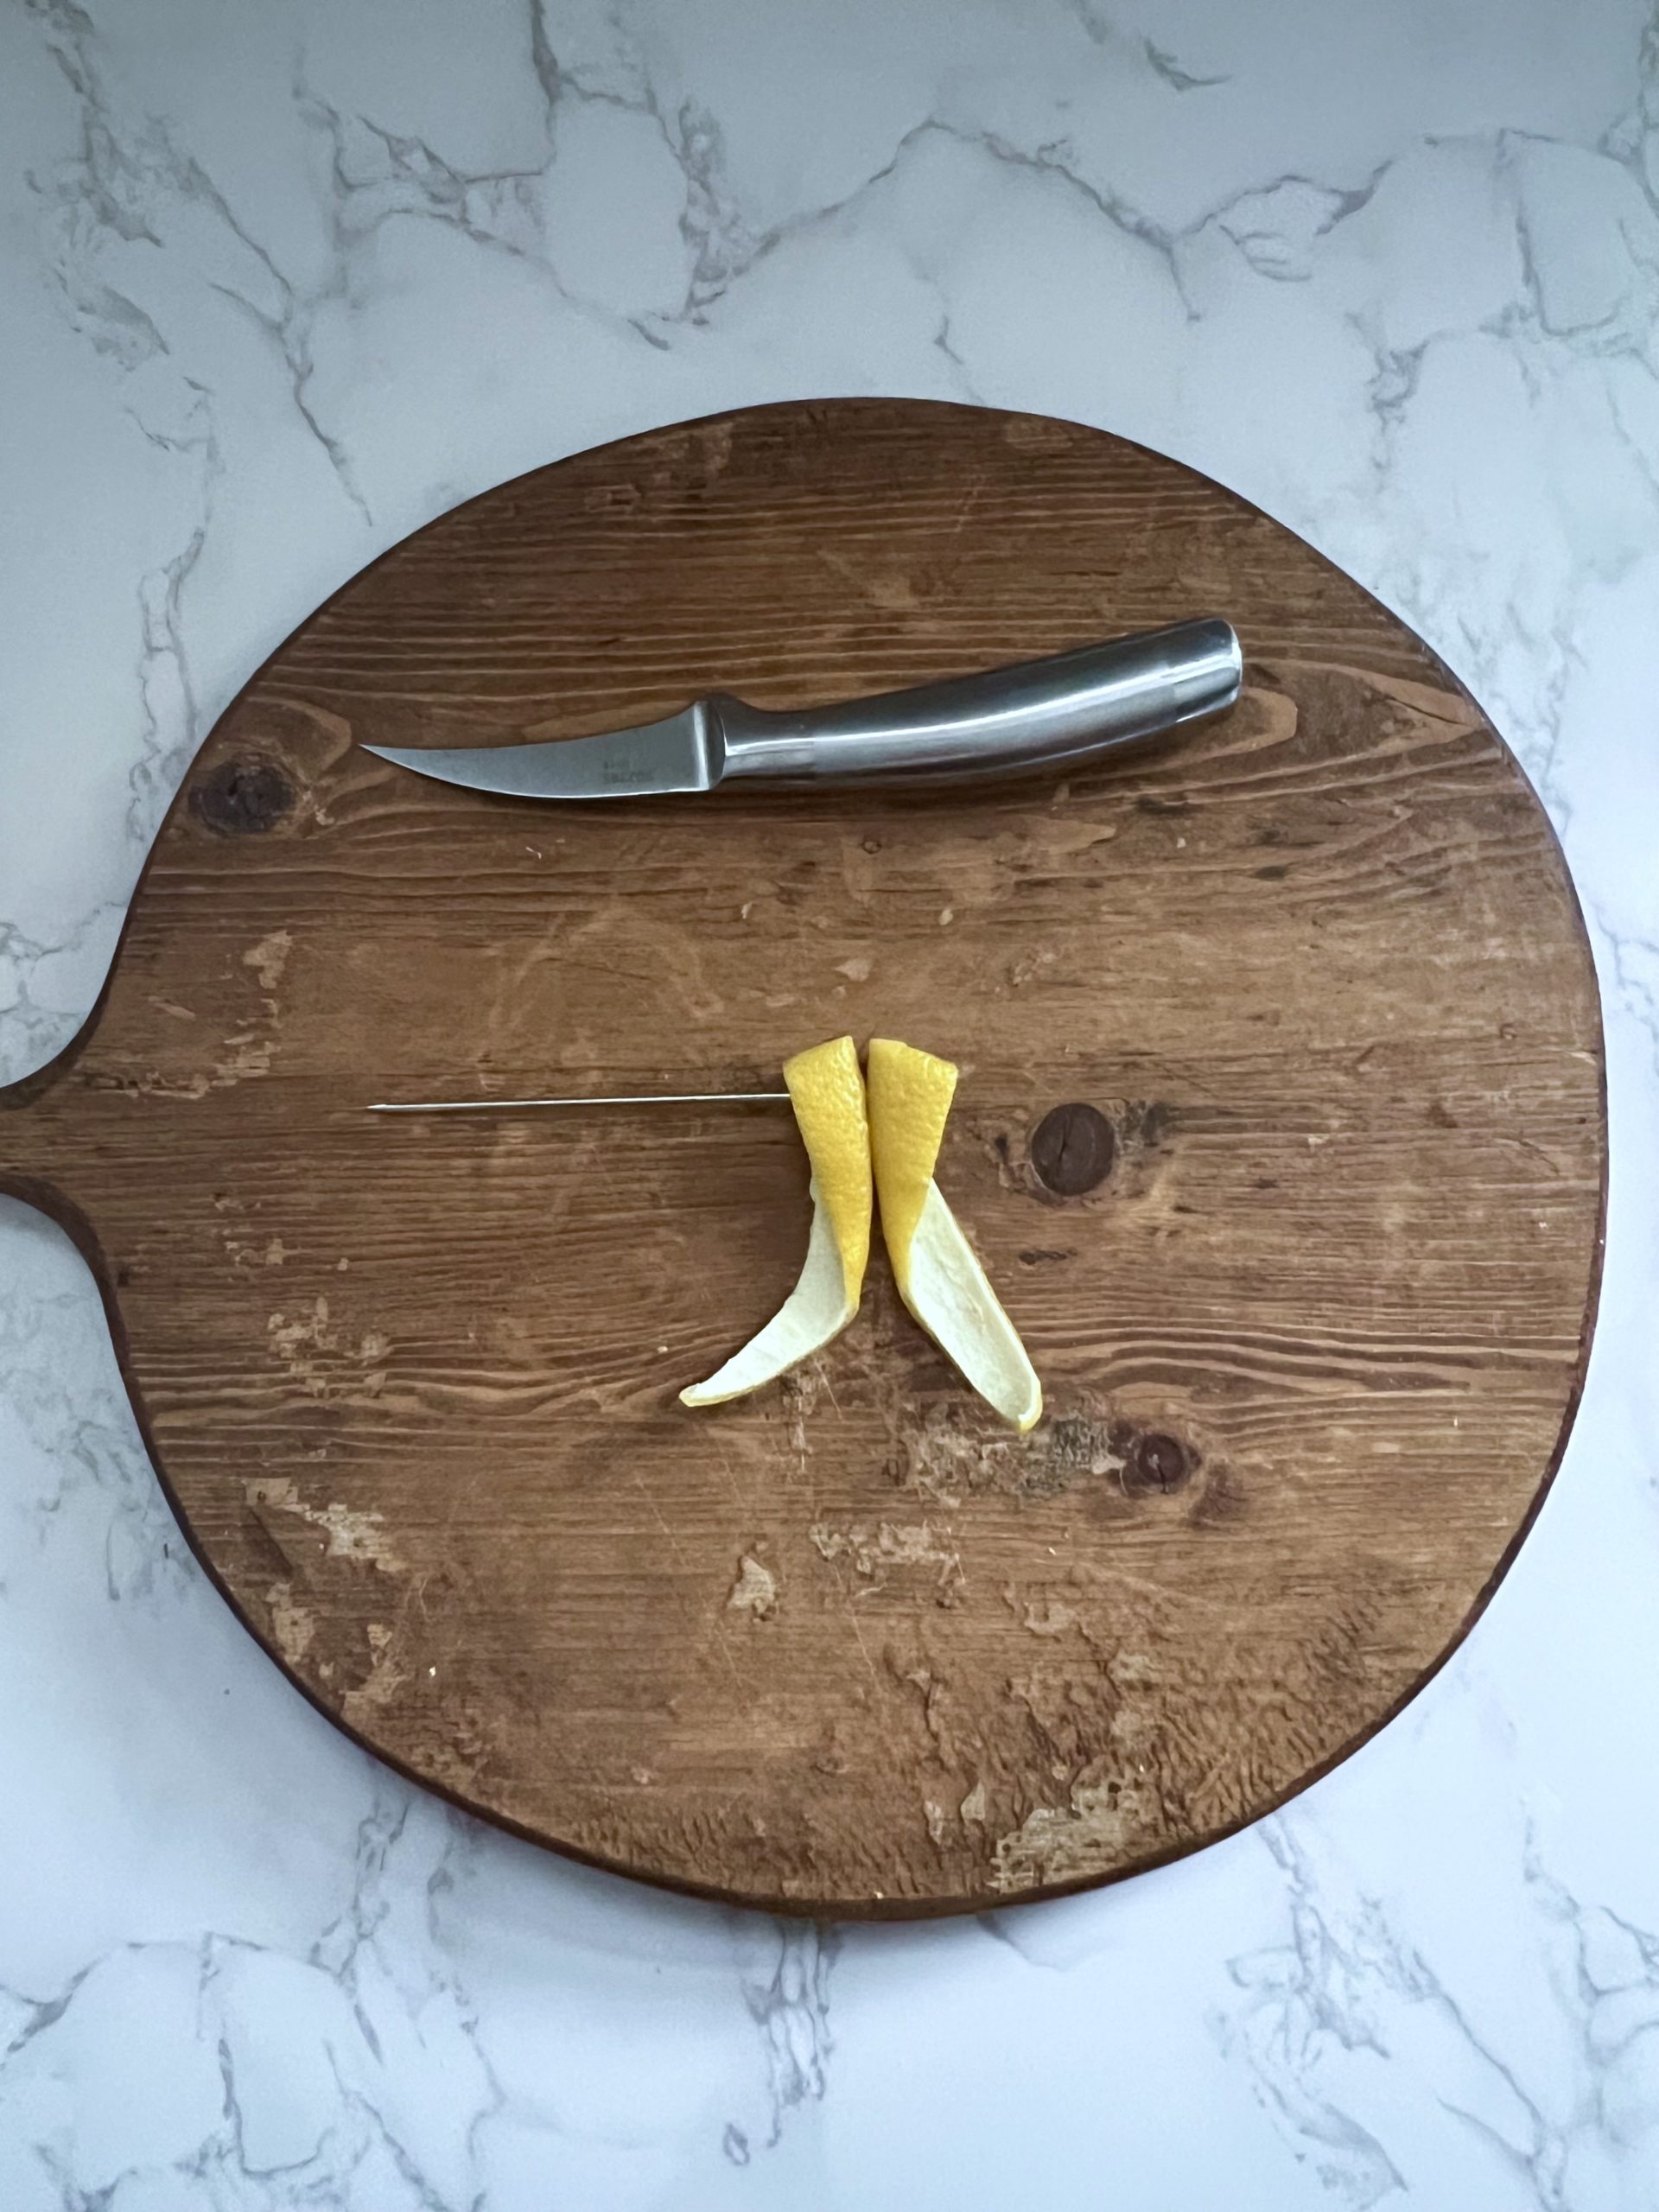 A knife and two pieces of lemon peel joined together with a cocktail pick to resemble the plane wings of the paper plane garnish on a cutting board.